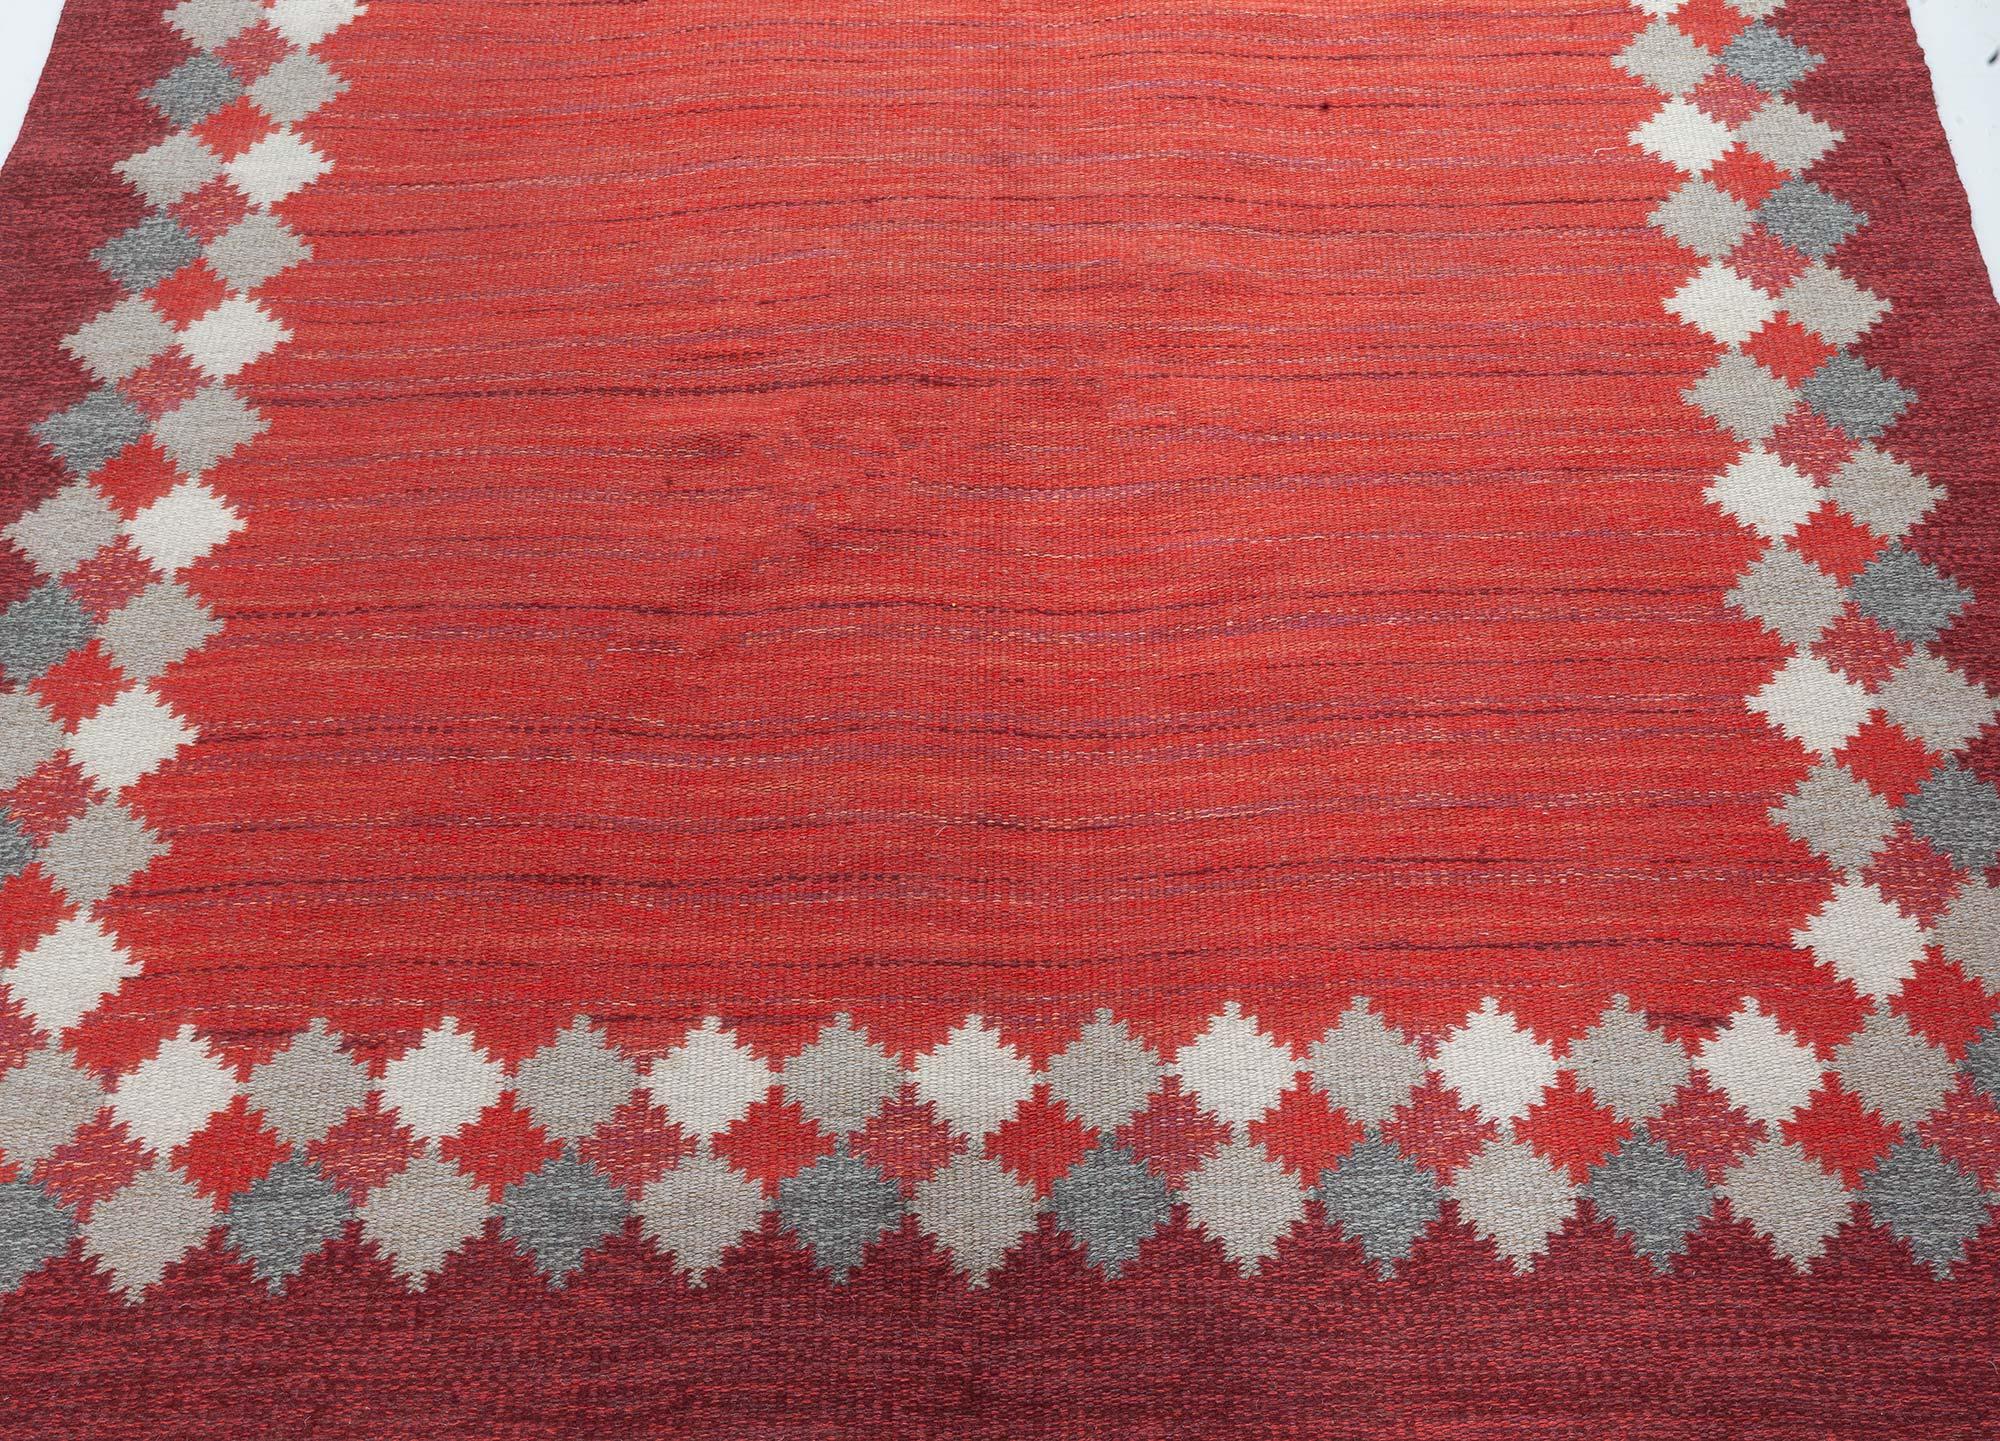 Midcentury Swedish red flat woven rug by Ingegerd Silow
Size: 6'3